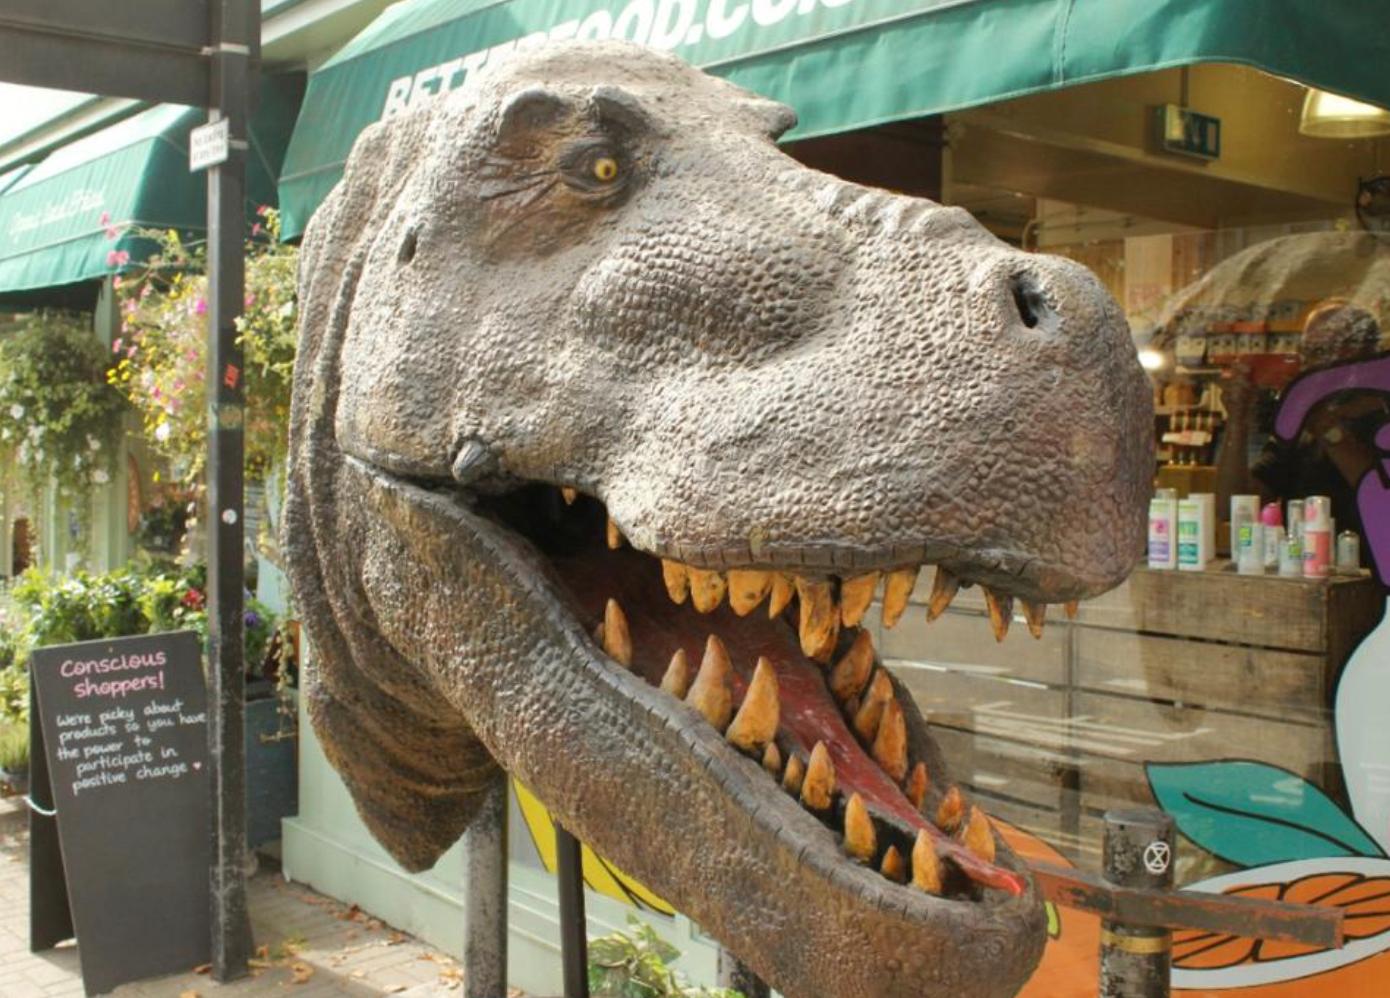 A stunning life-size fibreglass T-Rex dinosaur head.

Believed to have a connection to the first Jurassic Park film from 1993 - possibly used in promoting the movie at a film premiere or in a cinema lobby.

The detachable head is 5 feet in